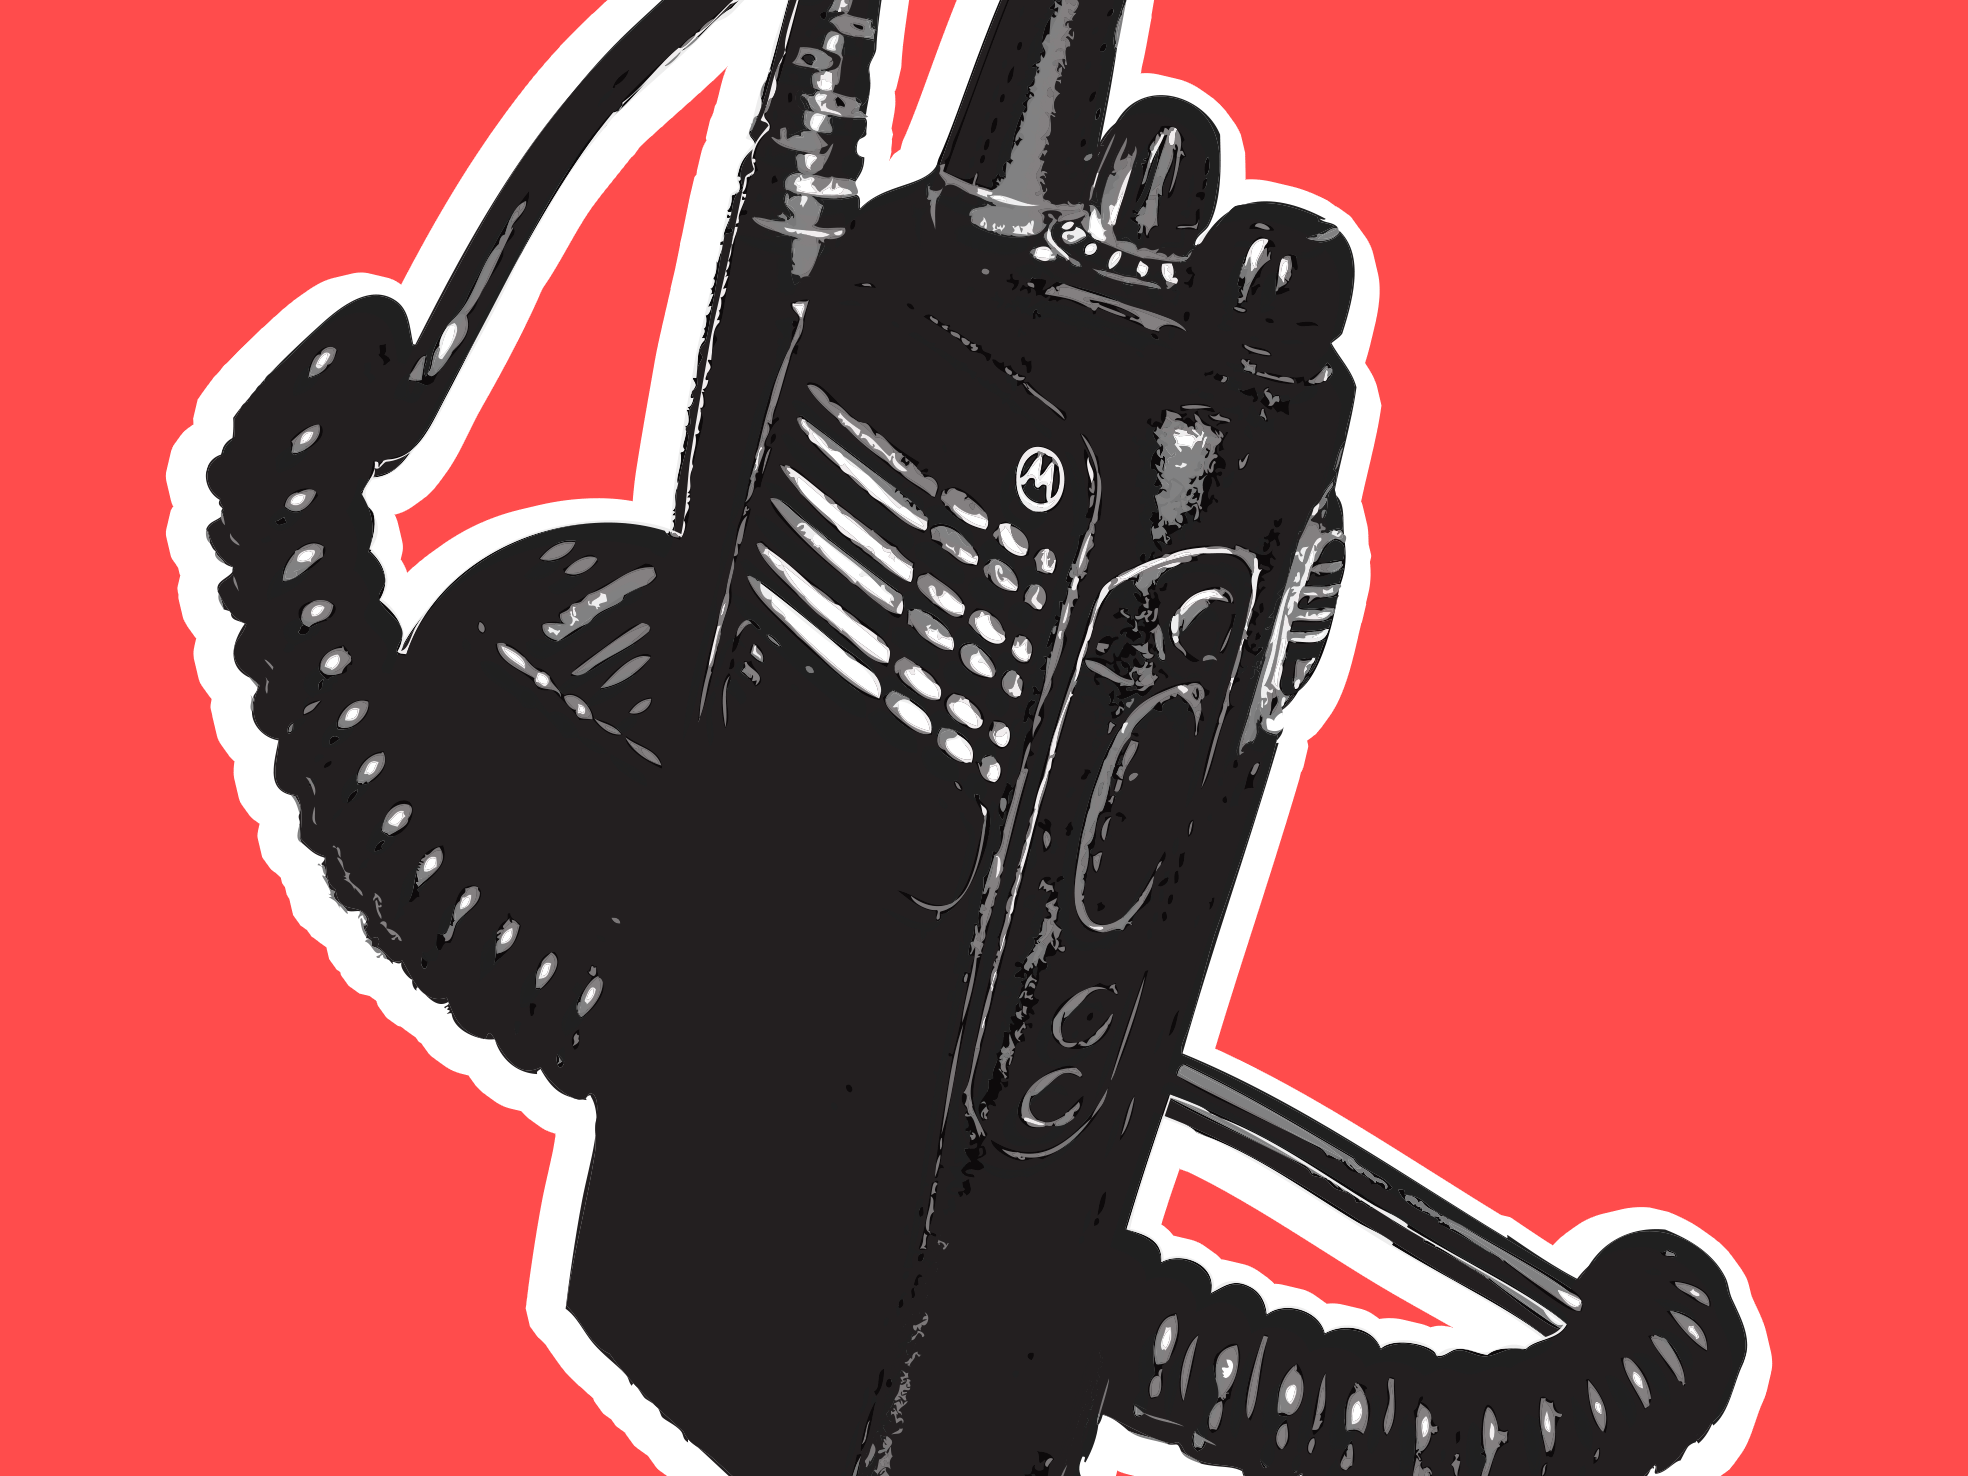 Illustration of a hand-held radio against red background